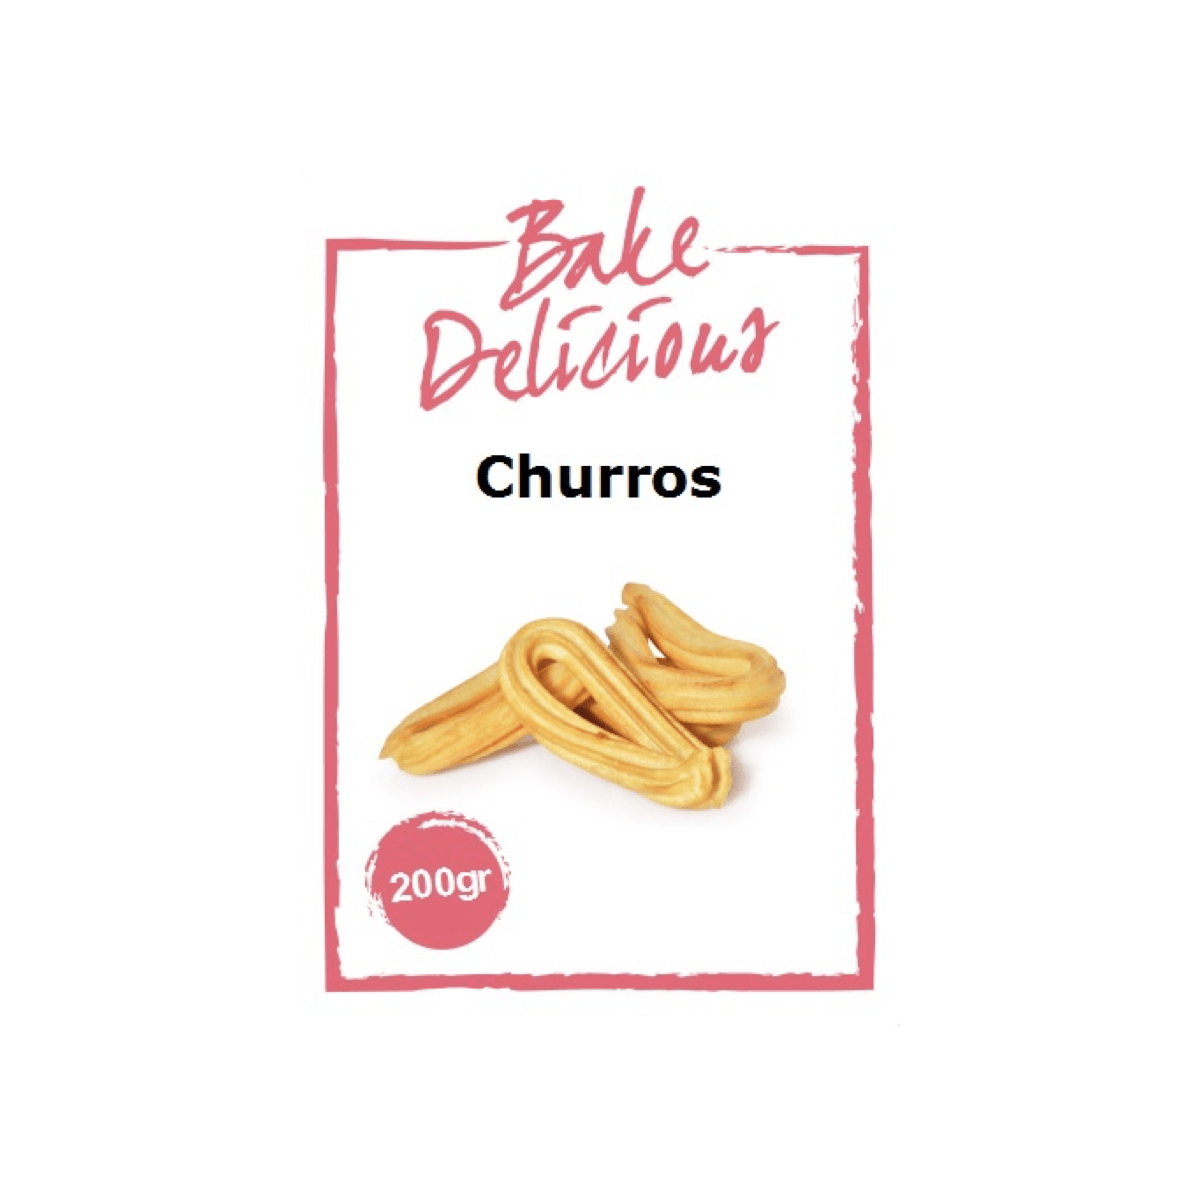 Bake Delicious mix voor Churros - 200g